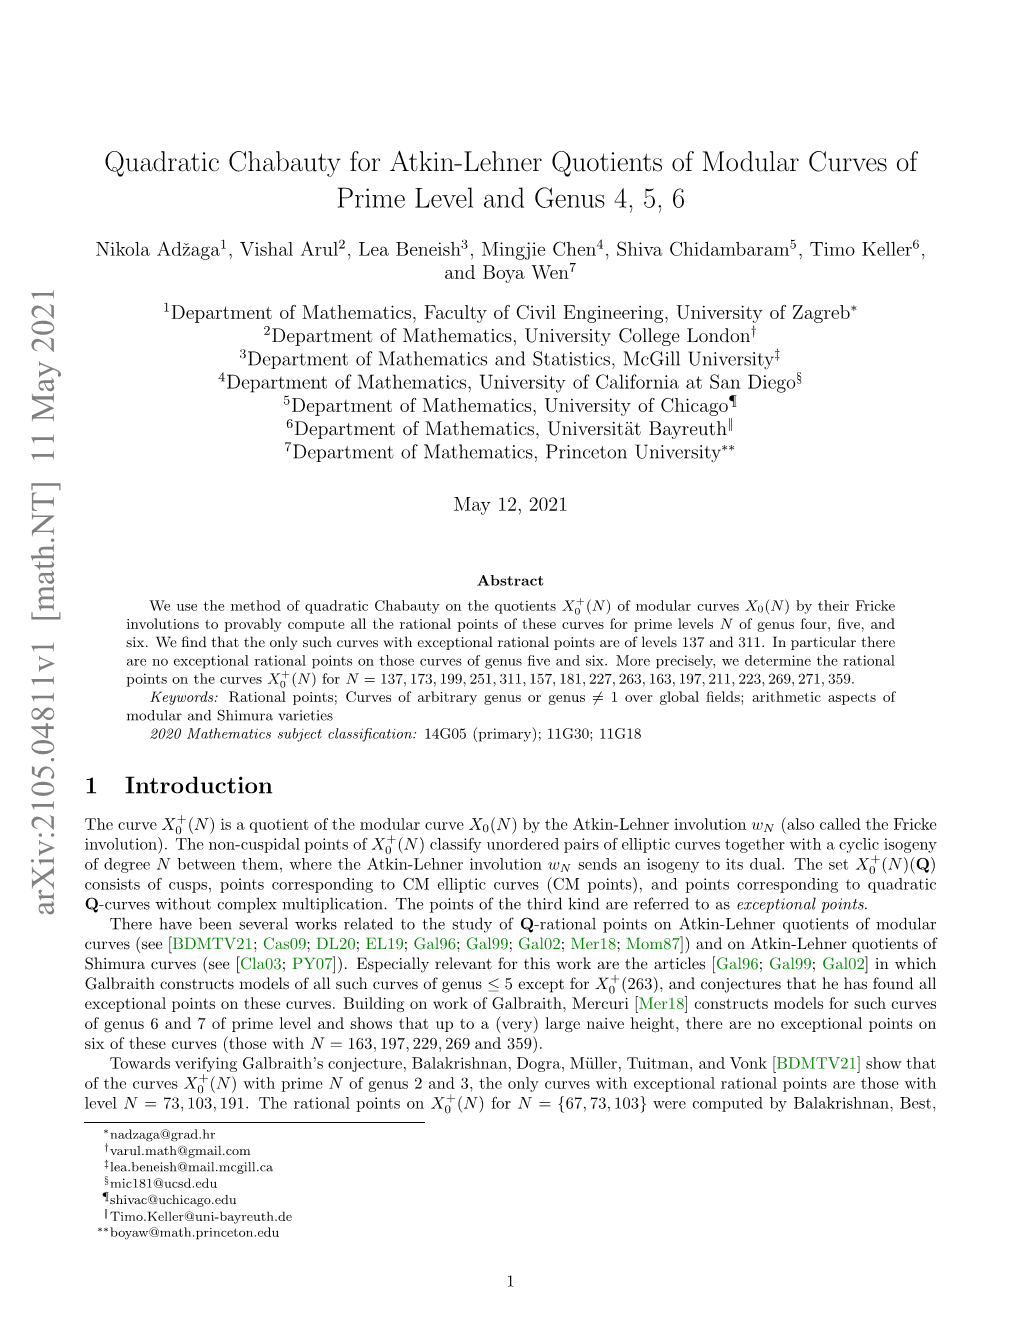 Quadratic Chabauty for Atkin-Lehner Quotients of Modular Curves